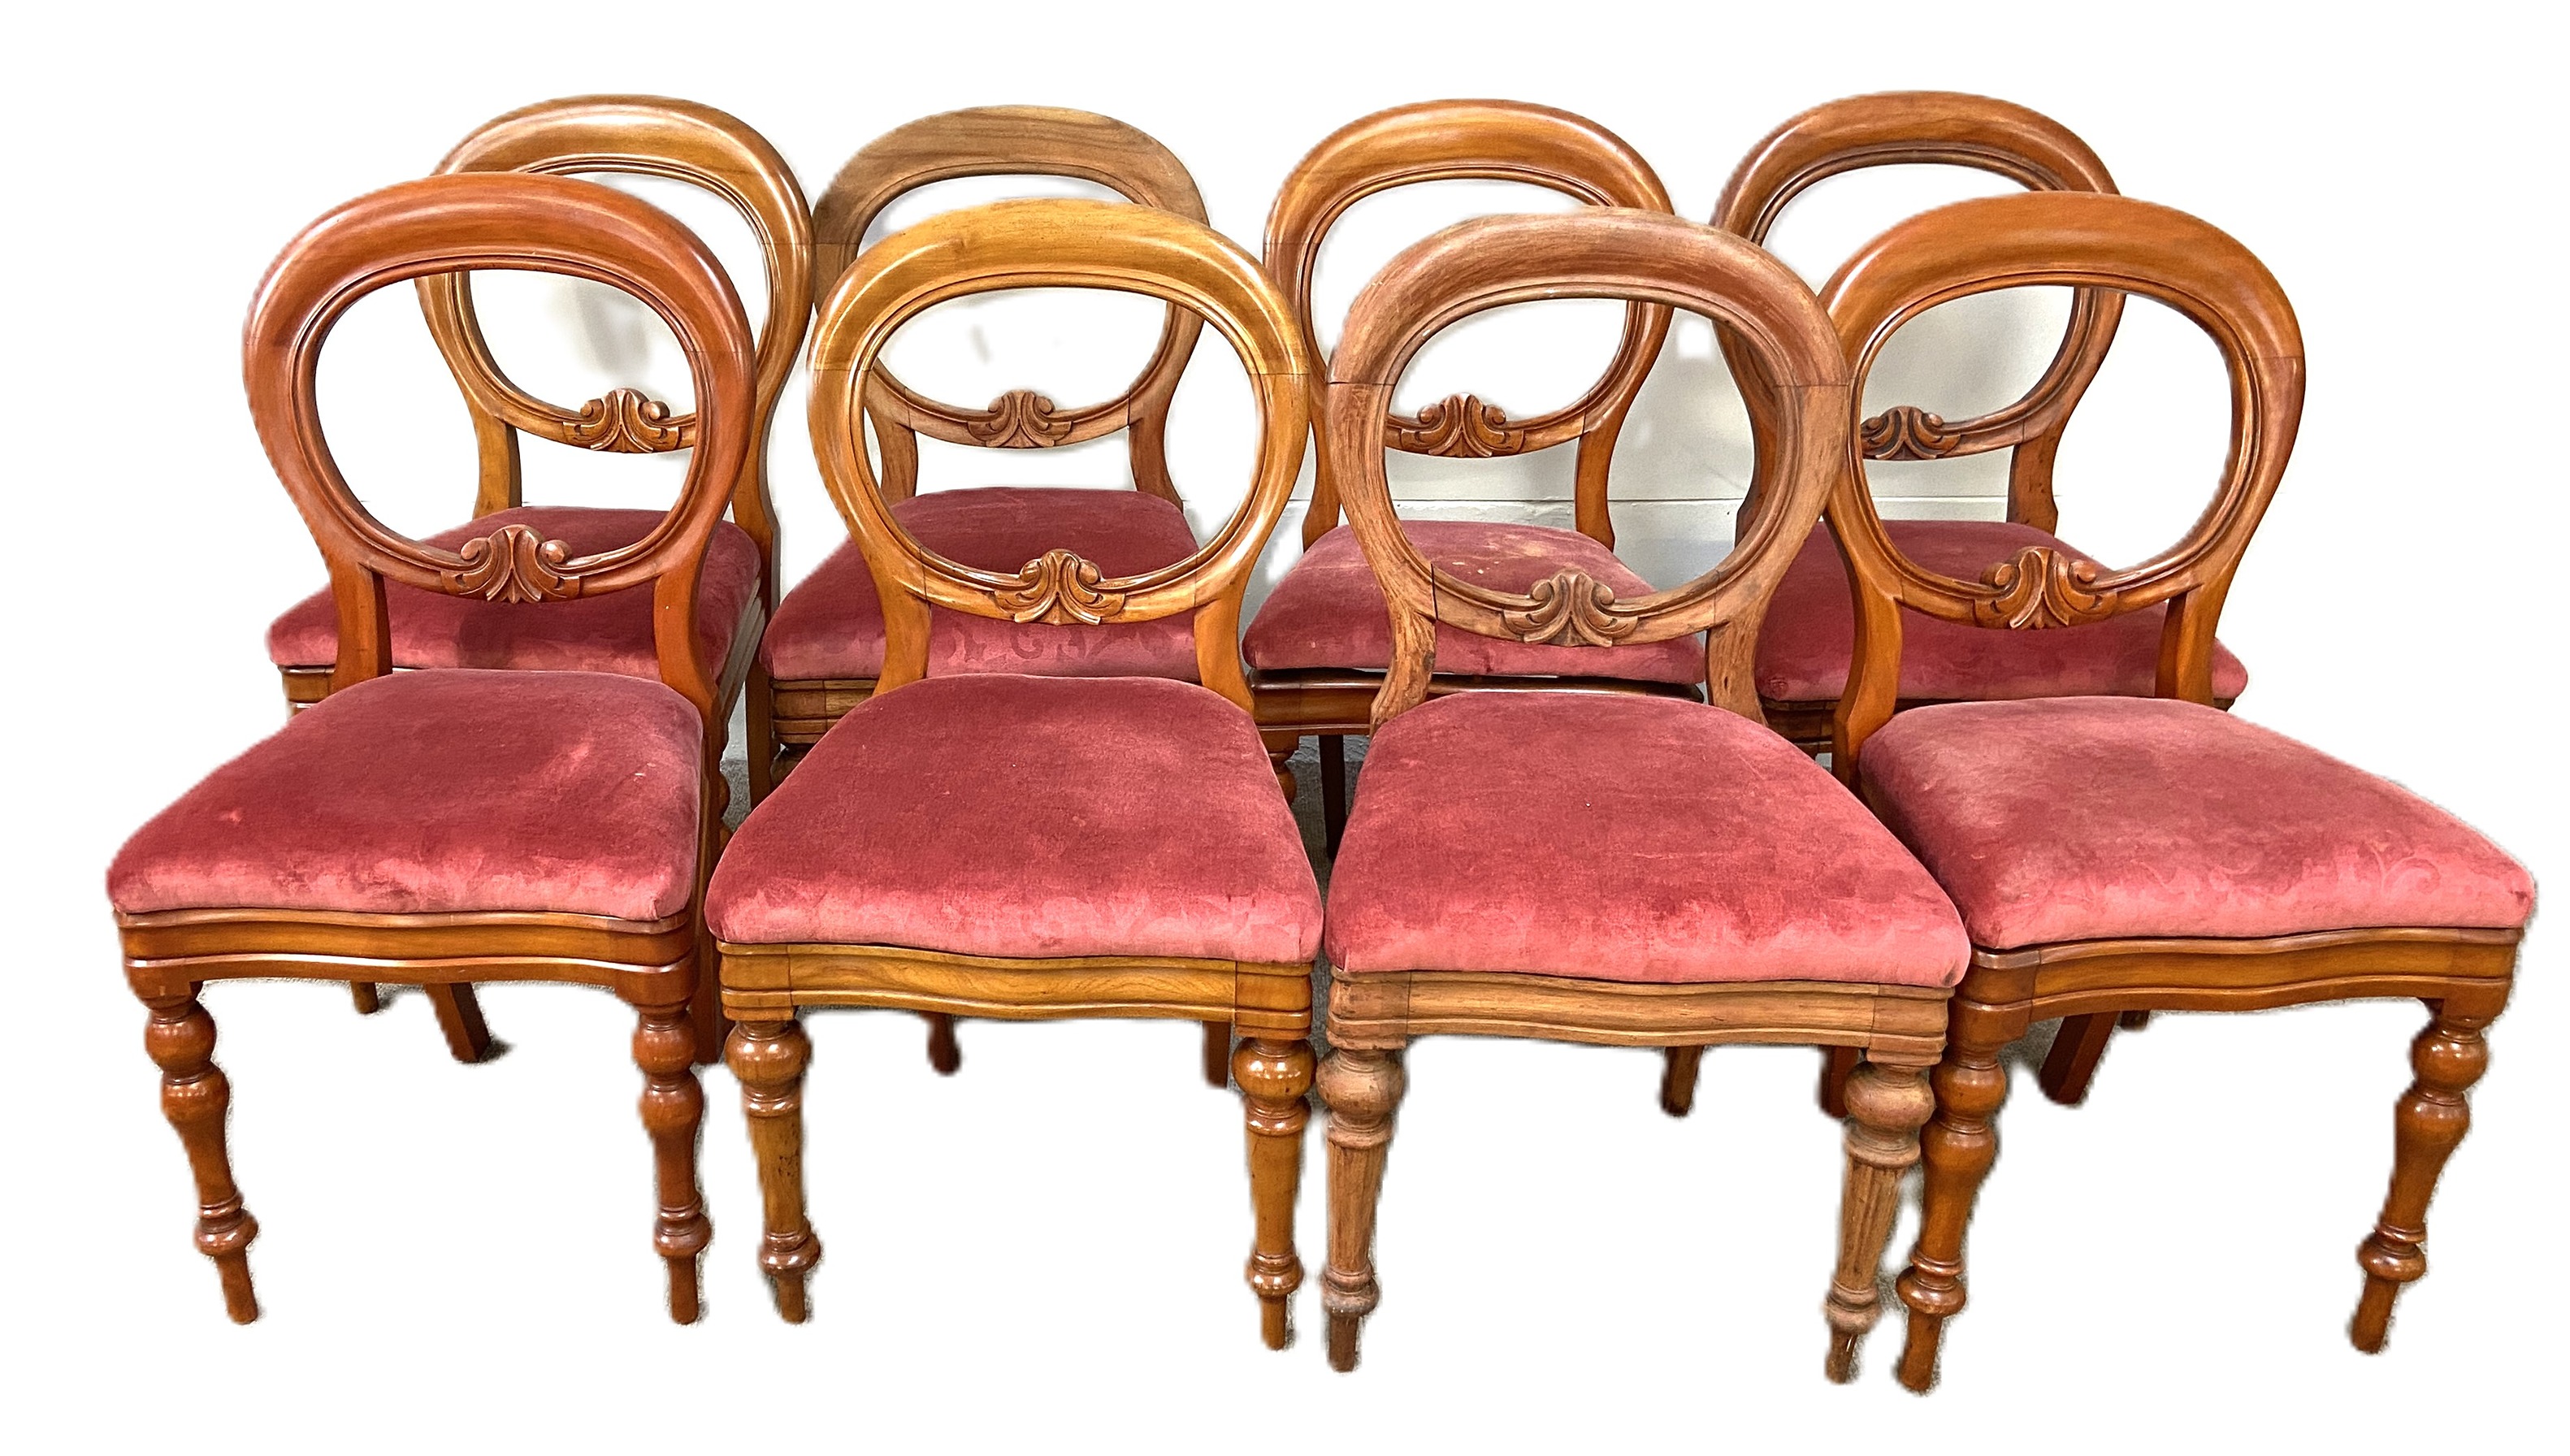 A set of Victorian style balloon backed dining chairs, each with a stuffed seat squab, currently